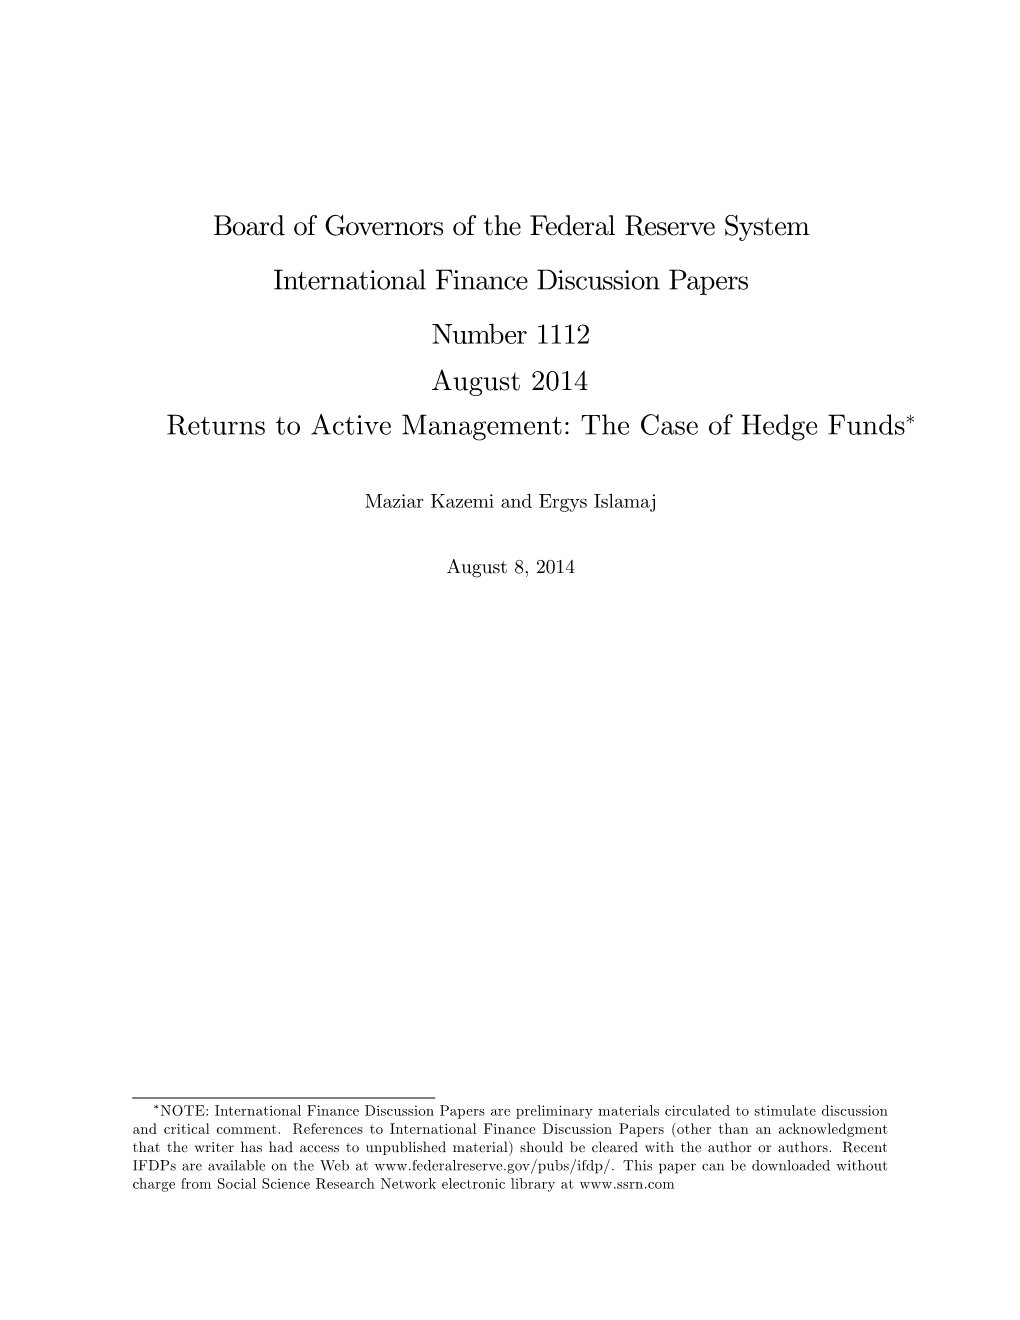 Returns to Active Management: the Case of Hedge Funds∗